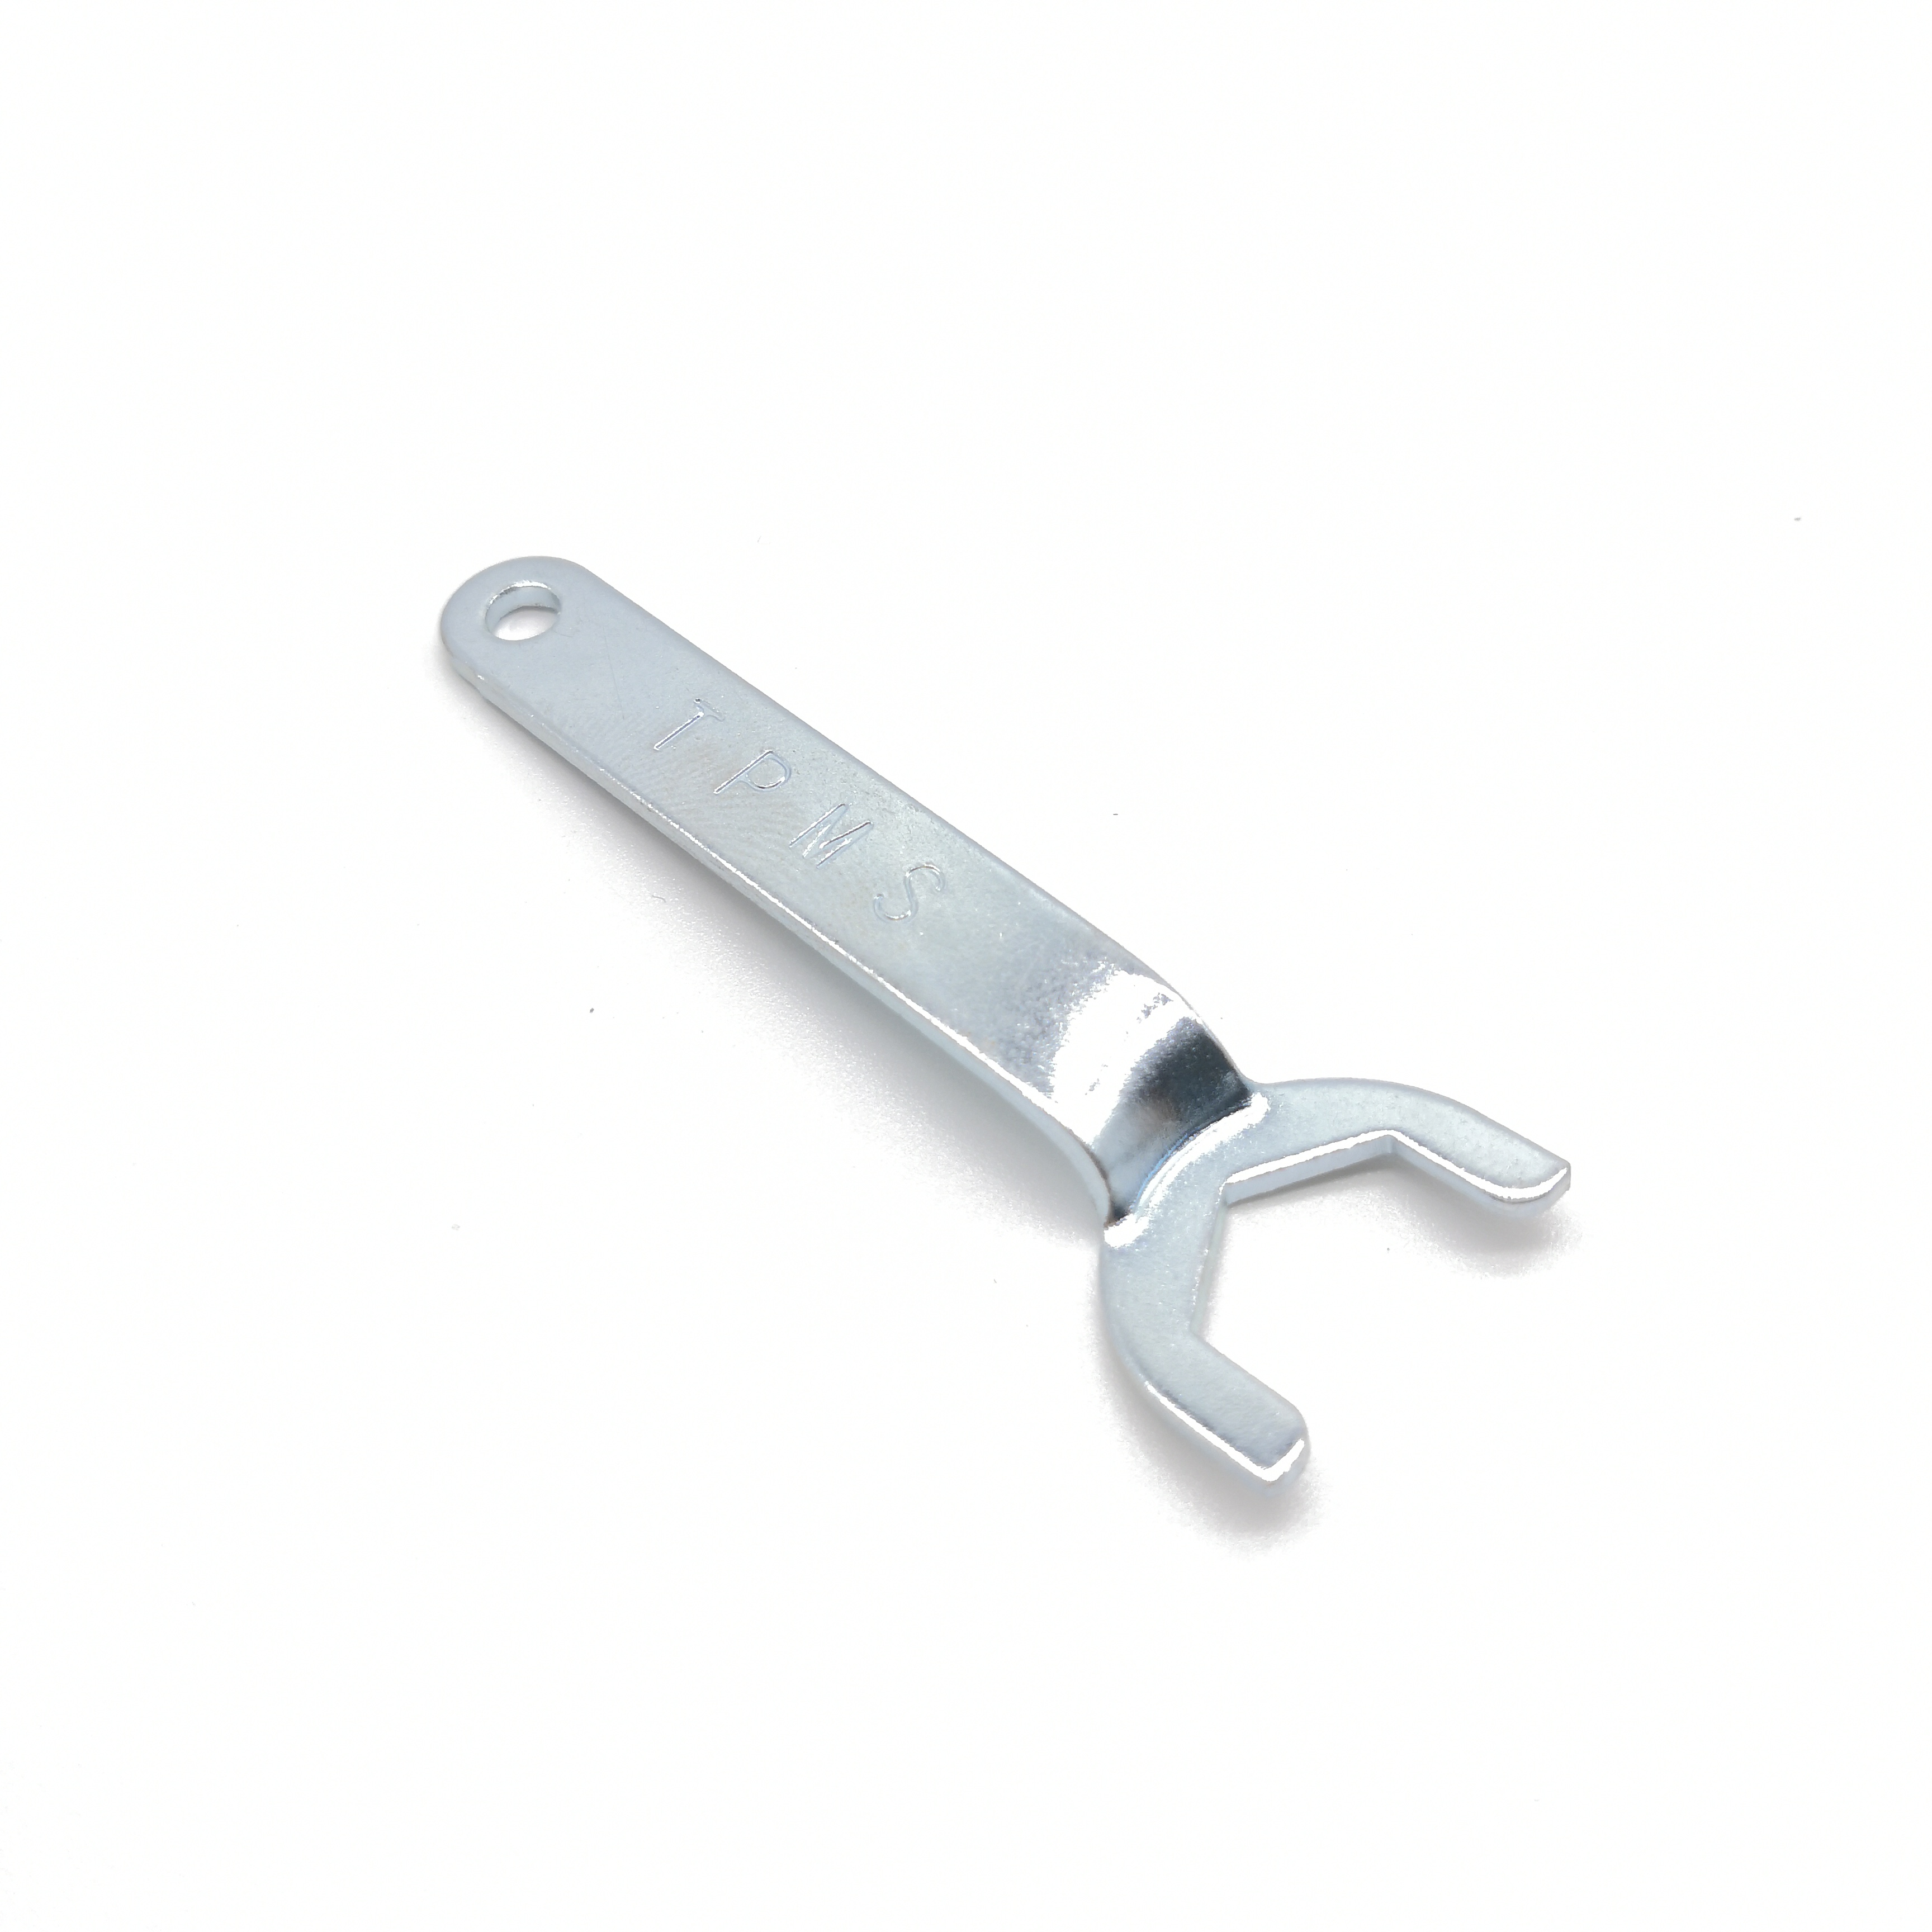 Hex wrench